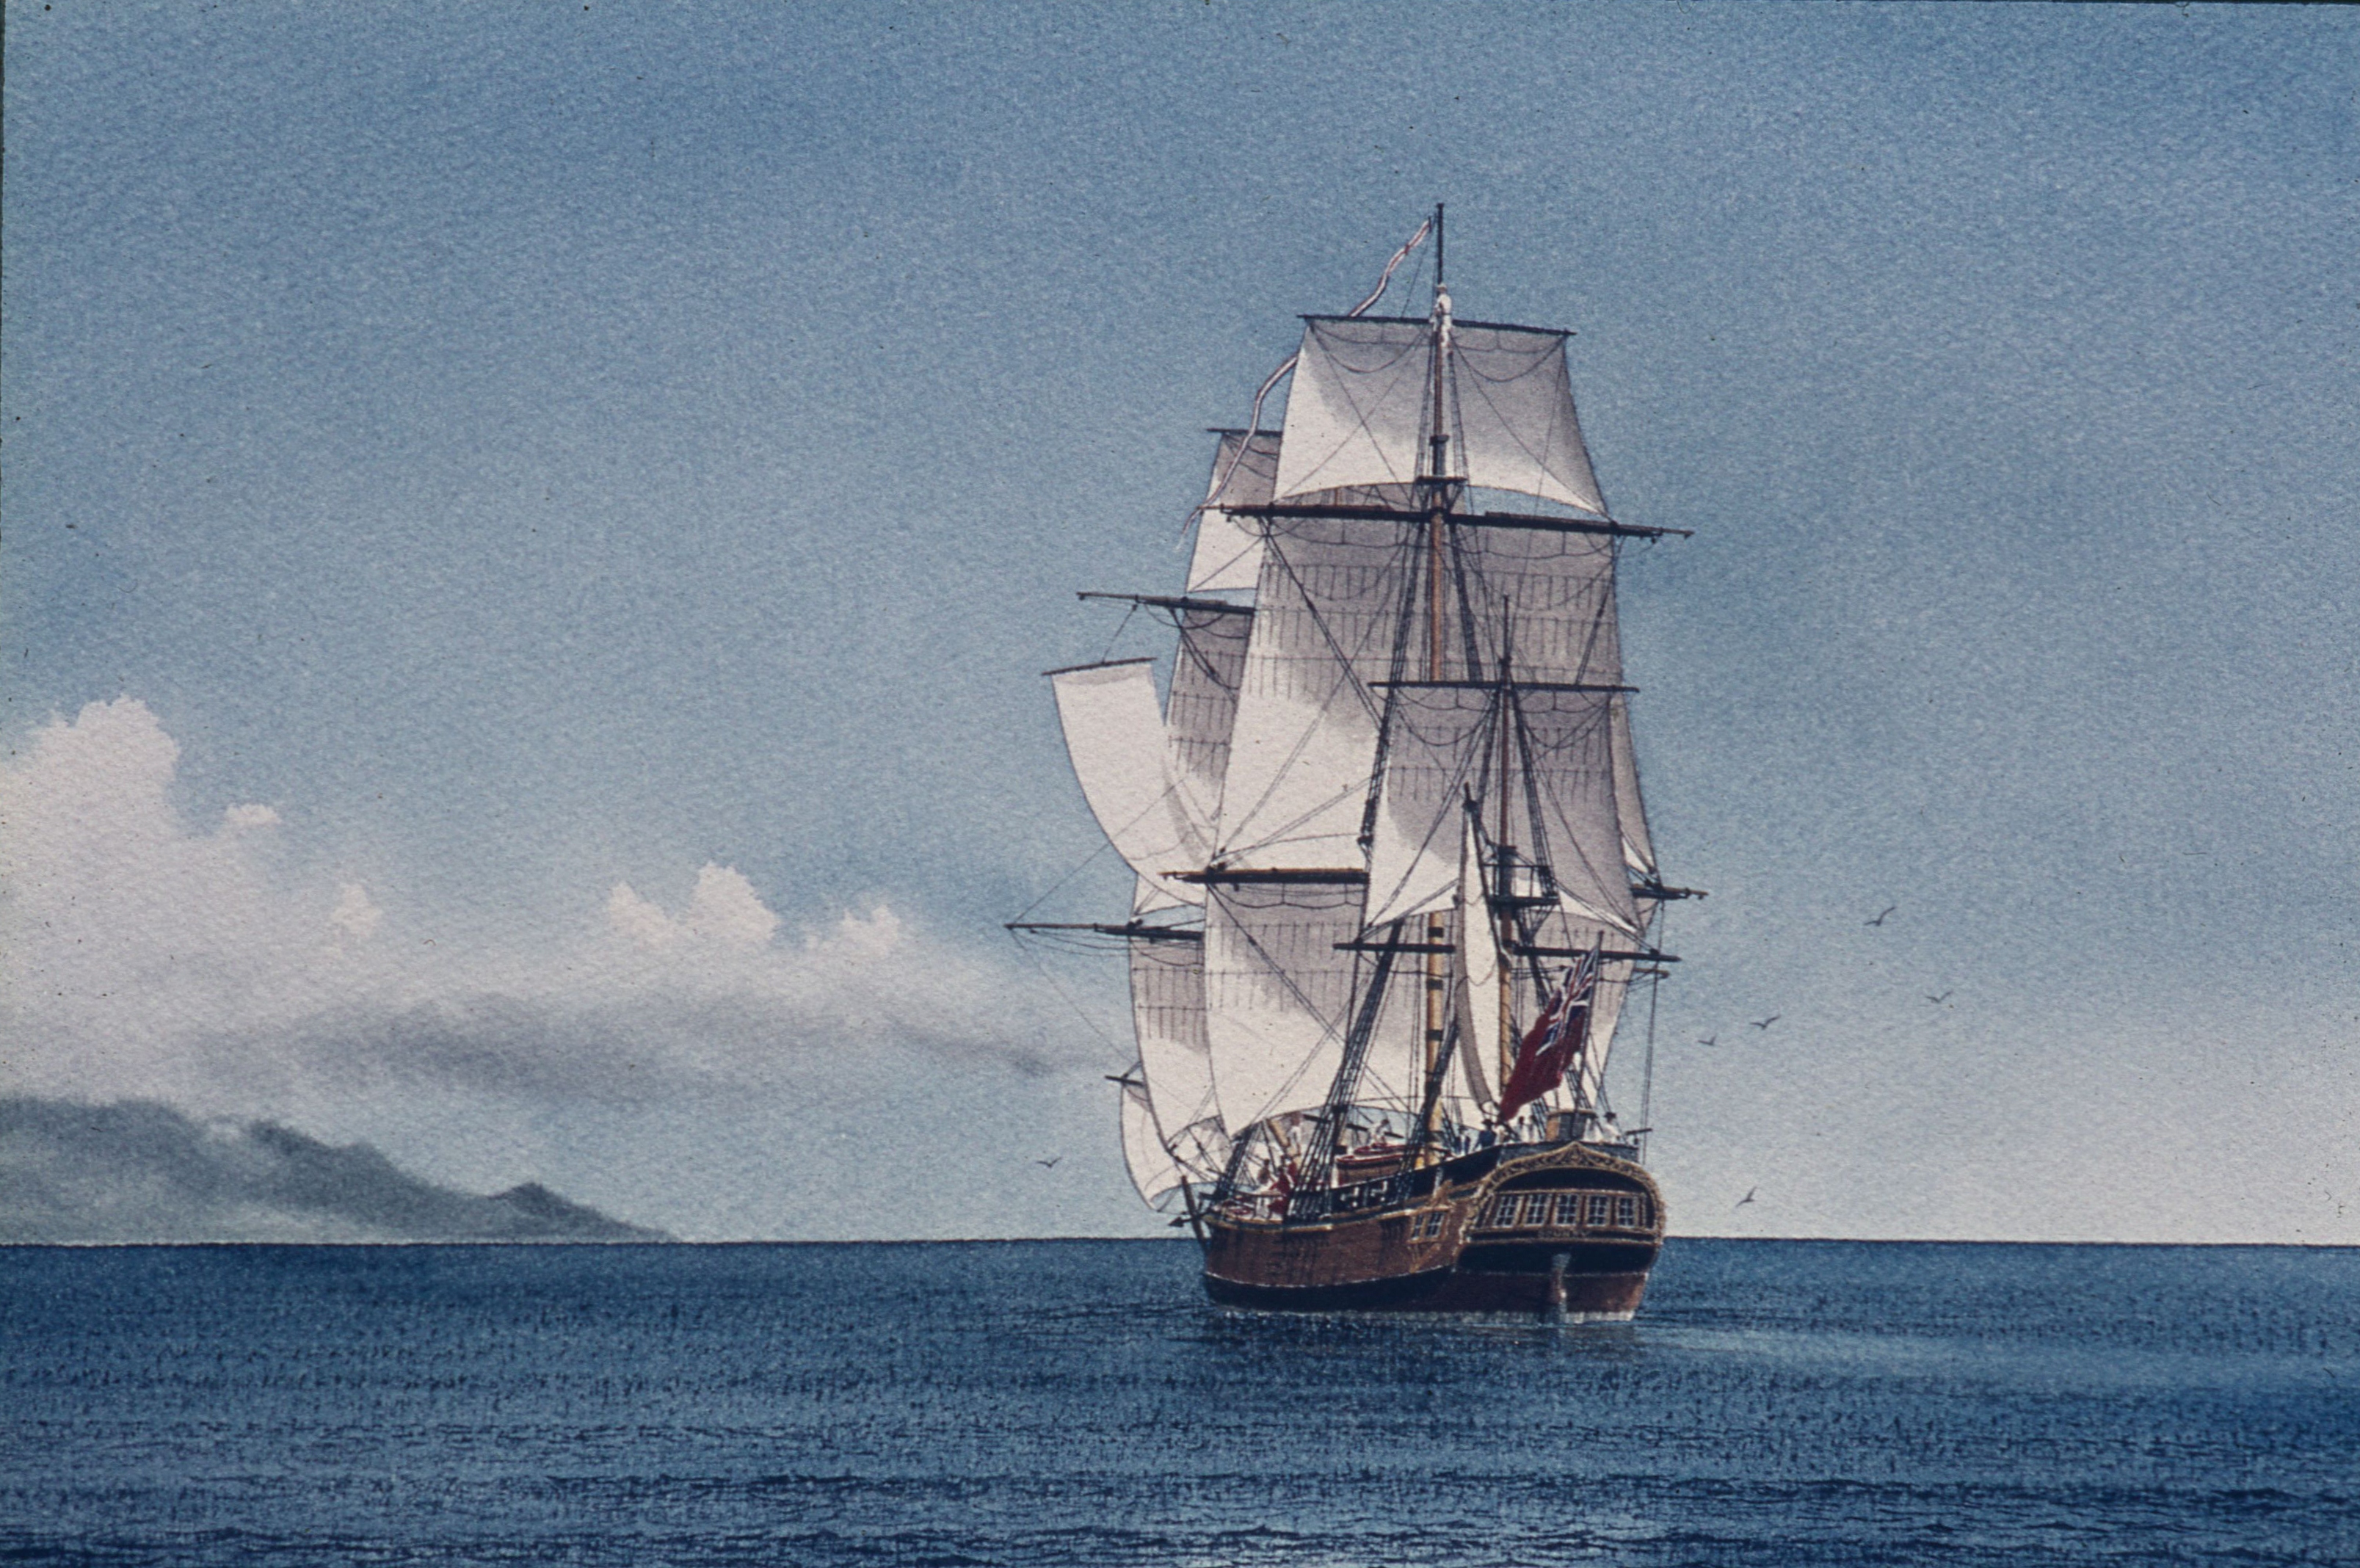 HMS BOUNTY in the South Pacific